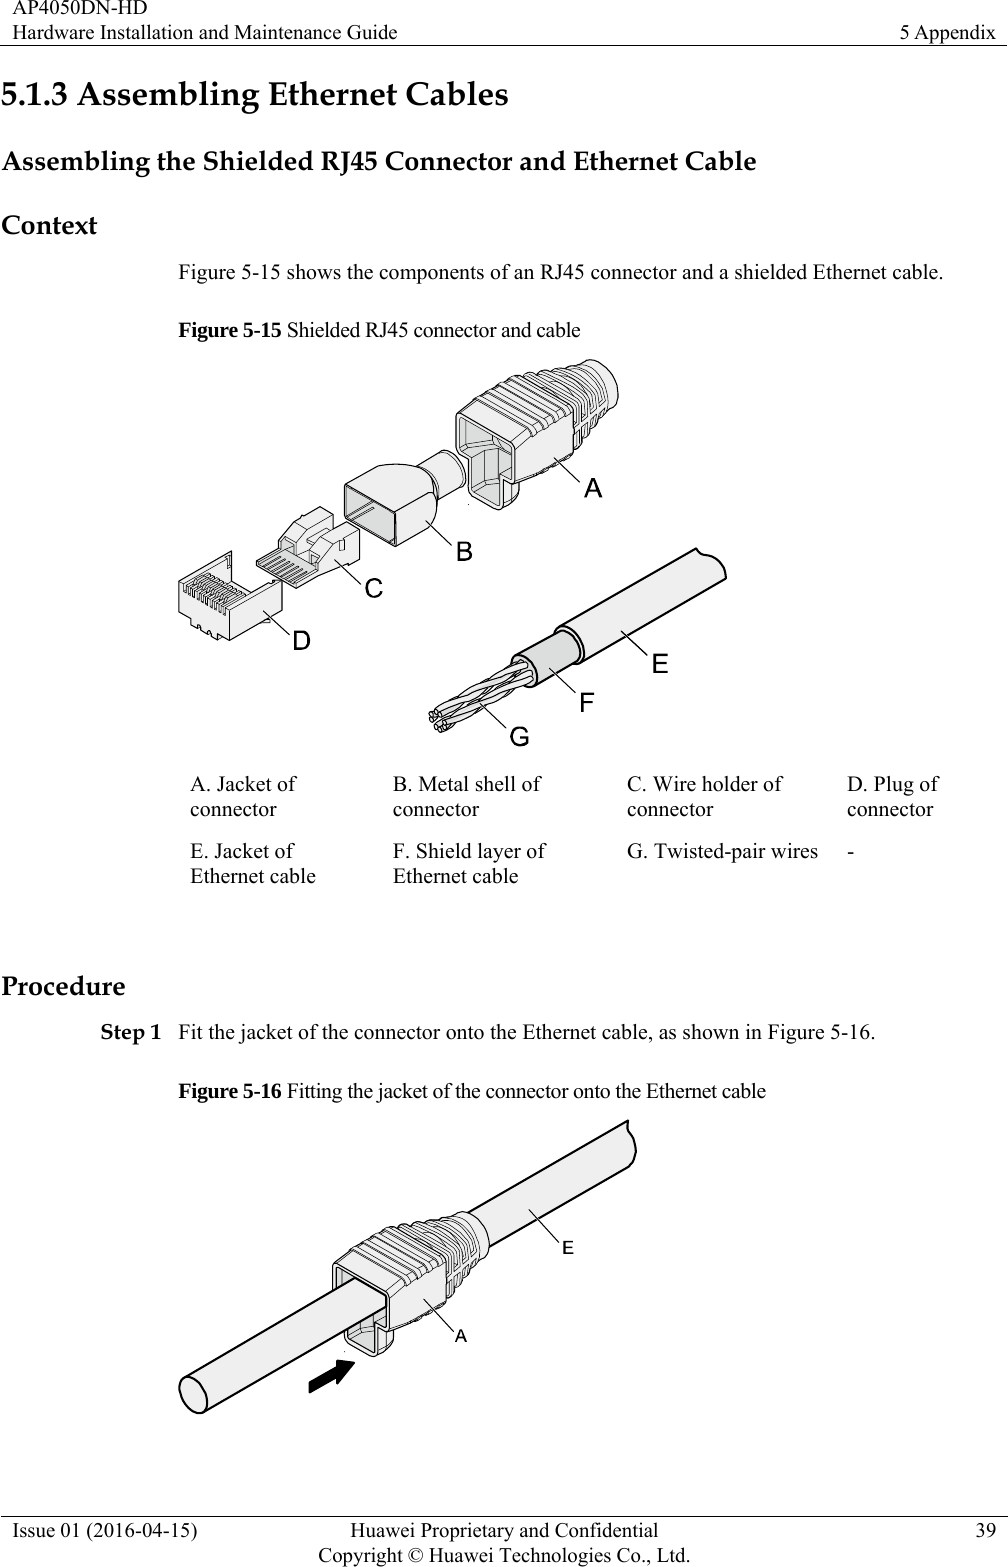 AP4050DN-HD Hardware Installation and Maintenance Guide  5 Appendix Issue 01 (2016-04-15)  Huawei Proprietary and Confidential         Copyright © Huawei Technologies Co., Ltd.39 5.1.3 Assembling Ethernet Cables Assembling the Shielded RJ45 Connector and Ethernet Cable Context Figure 5-15 shows the components of an RJ45 connector and a shielded Ethernet cable. Figure 5-15 Shielded RJ45 connector and cable  A. Jacket of connector B. Metal shell of connector C. Wire holder of connector D. Plug of connector E. Jacket of Ethernet cable F. Shield layer of Ethernet cable G. Twisted-pair wires  -  Procedure Step 1 Fit the jacket of the connector onto the Ethernet cable, as shown in Figure 5-16. Figure 5-16 Fitting the jacket of the connector onto the Ethernet cable   